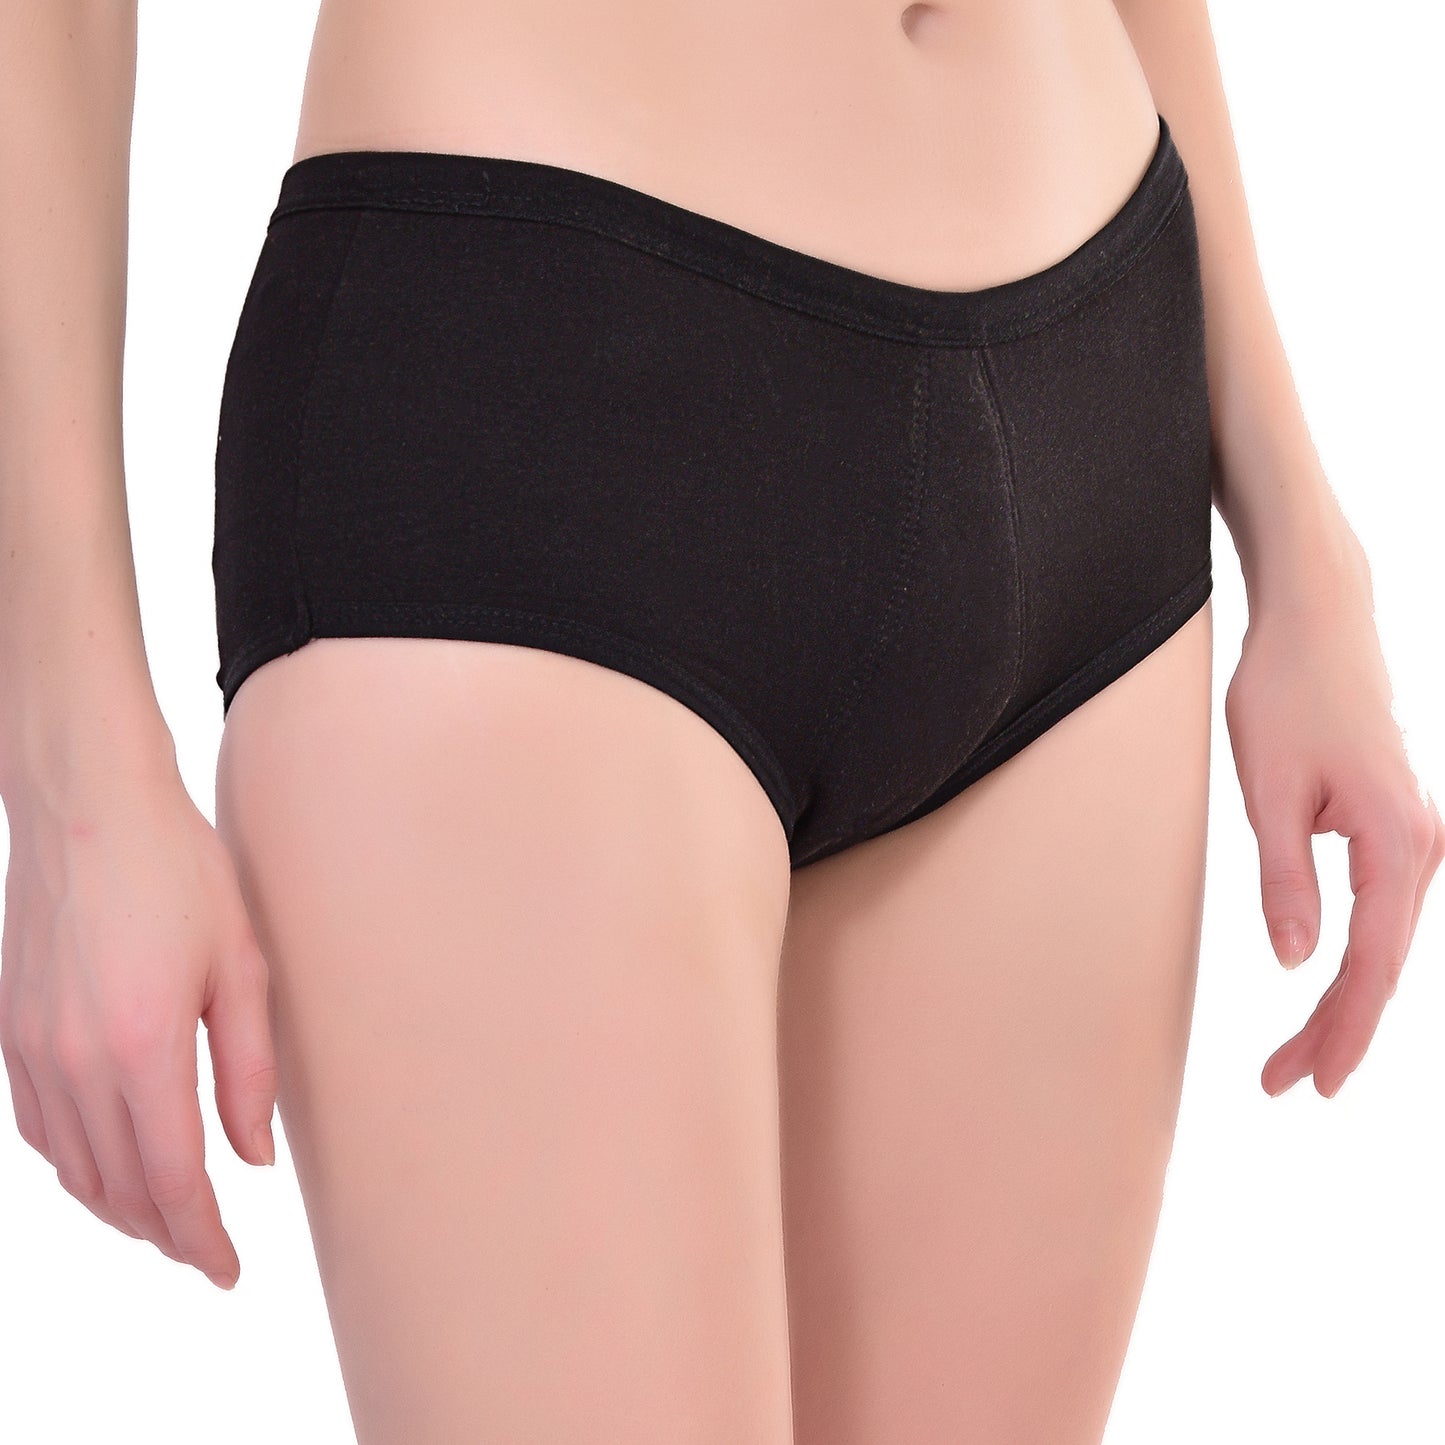 Fabpad Reusable Leak Proof Period, Urine incontinence, Postpartum Panties/Underwear lasts for up to 3 Years - made for heaviest of flow days